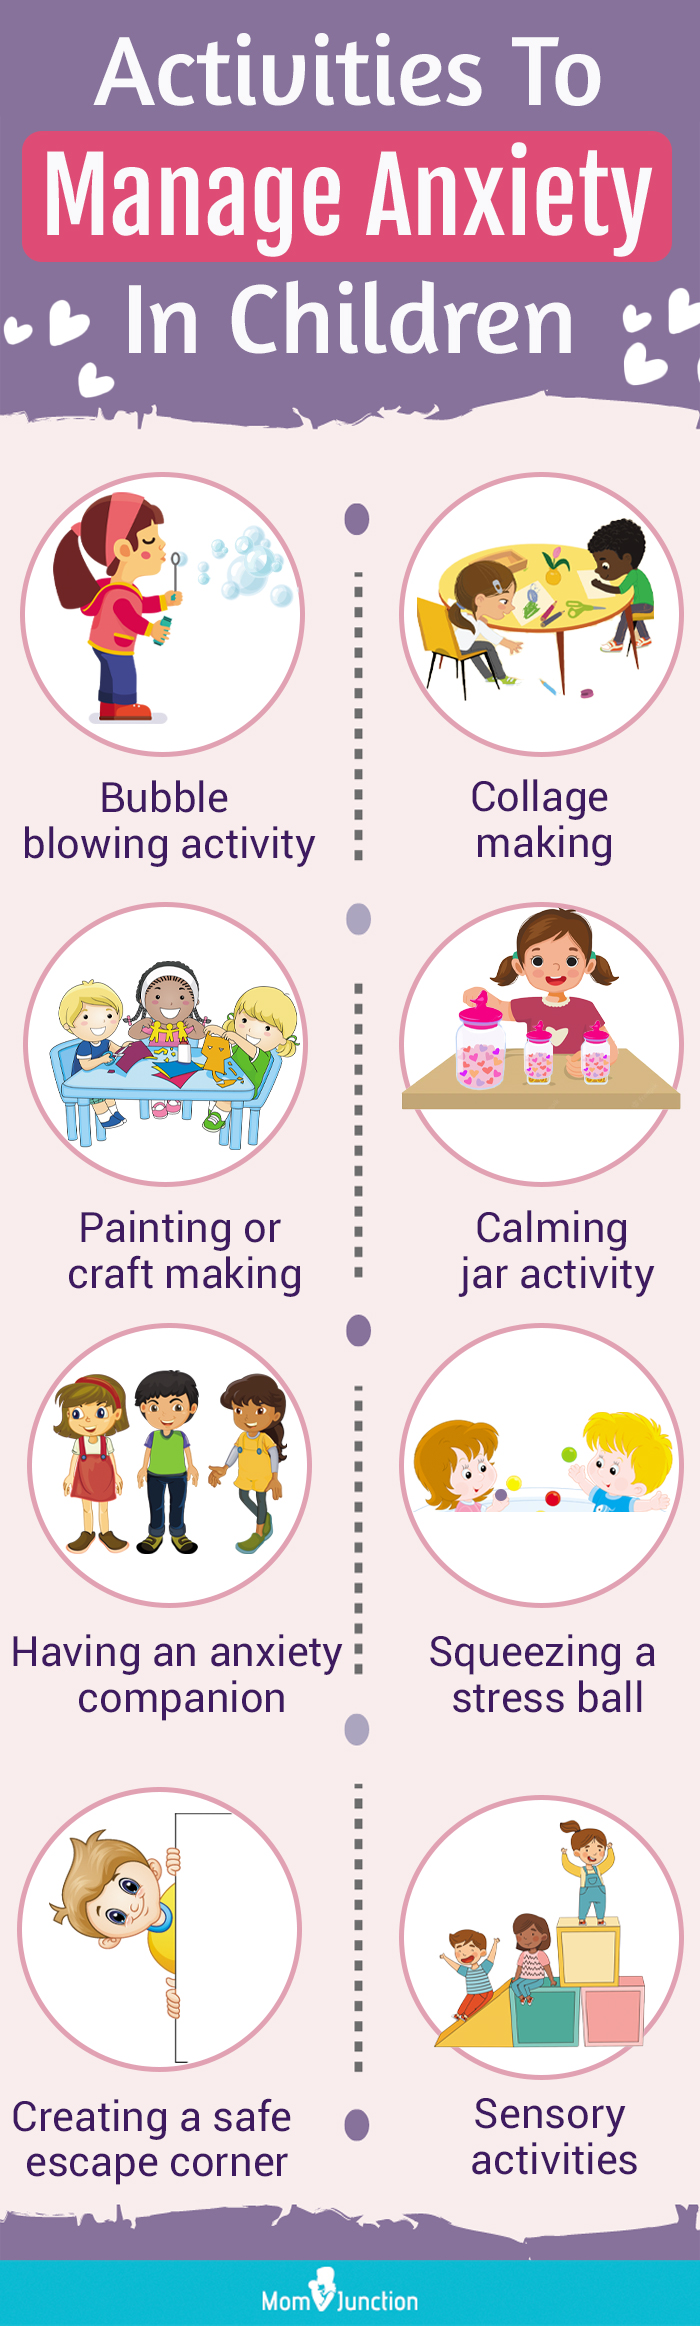 activities to manage anxiety in children (infographic)